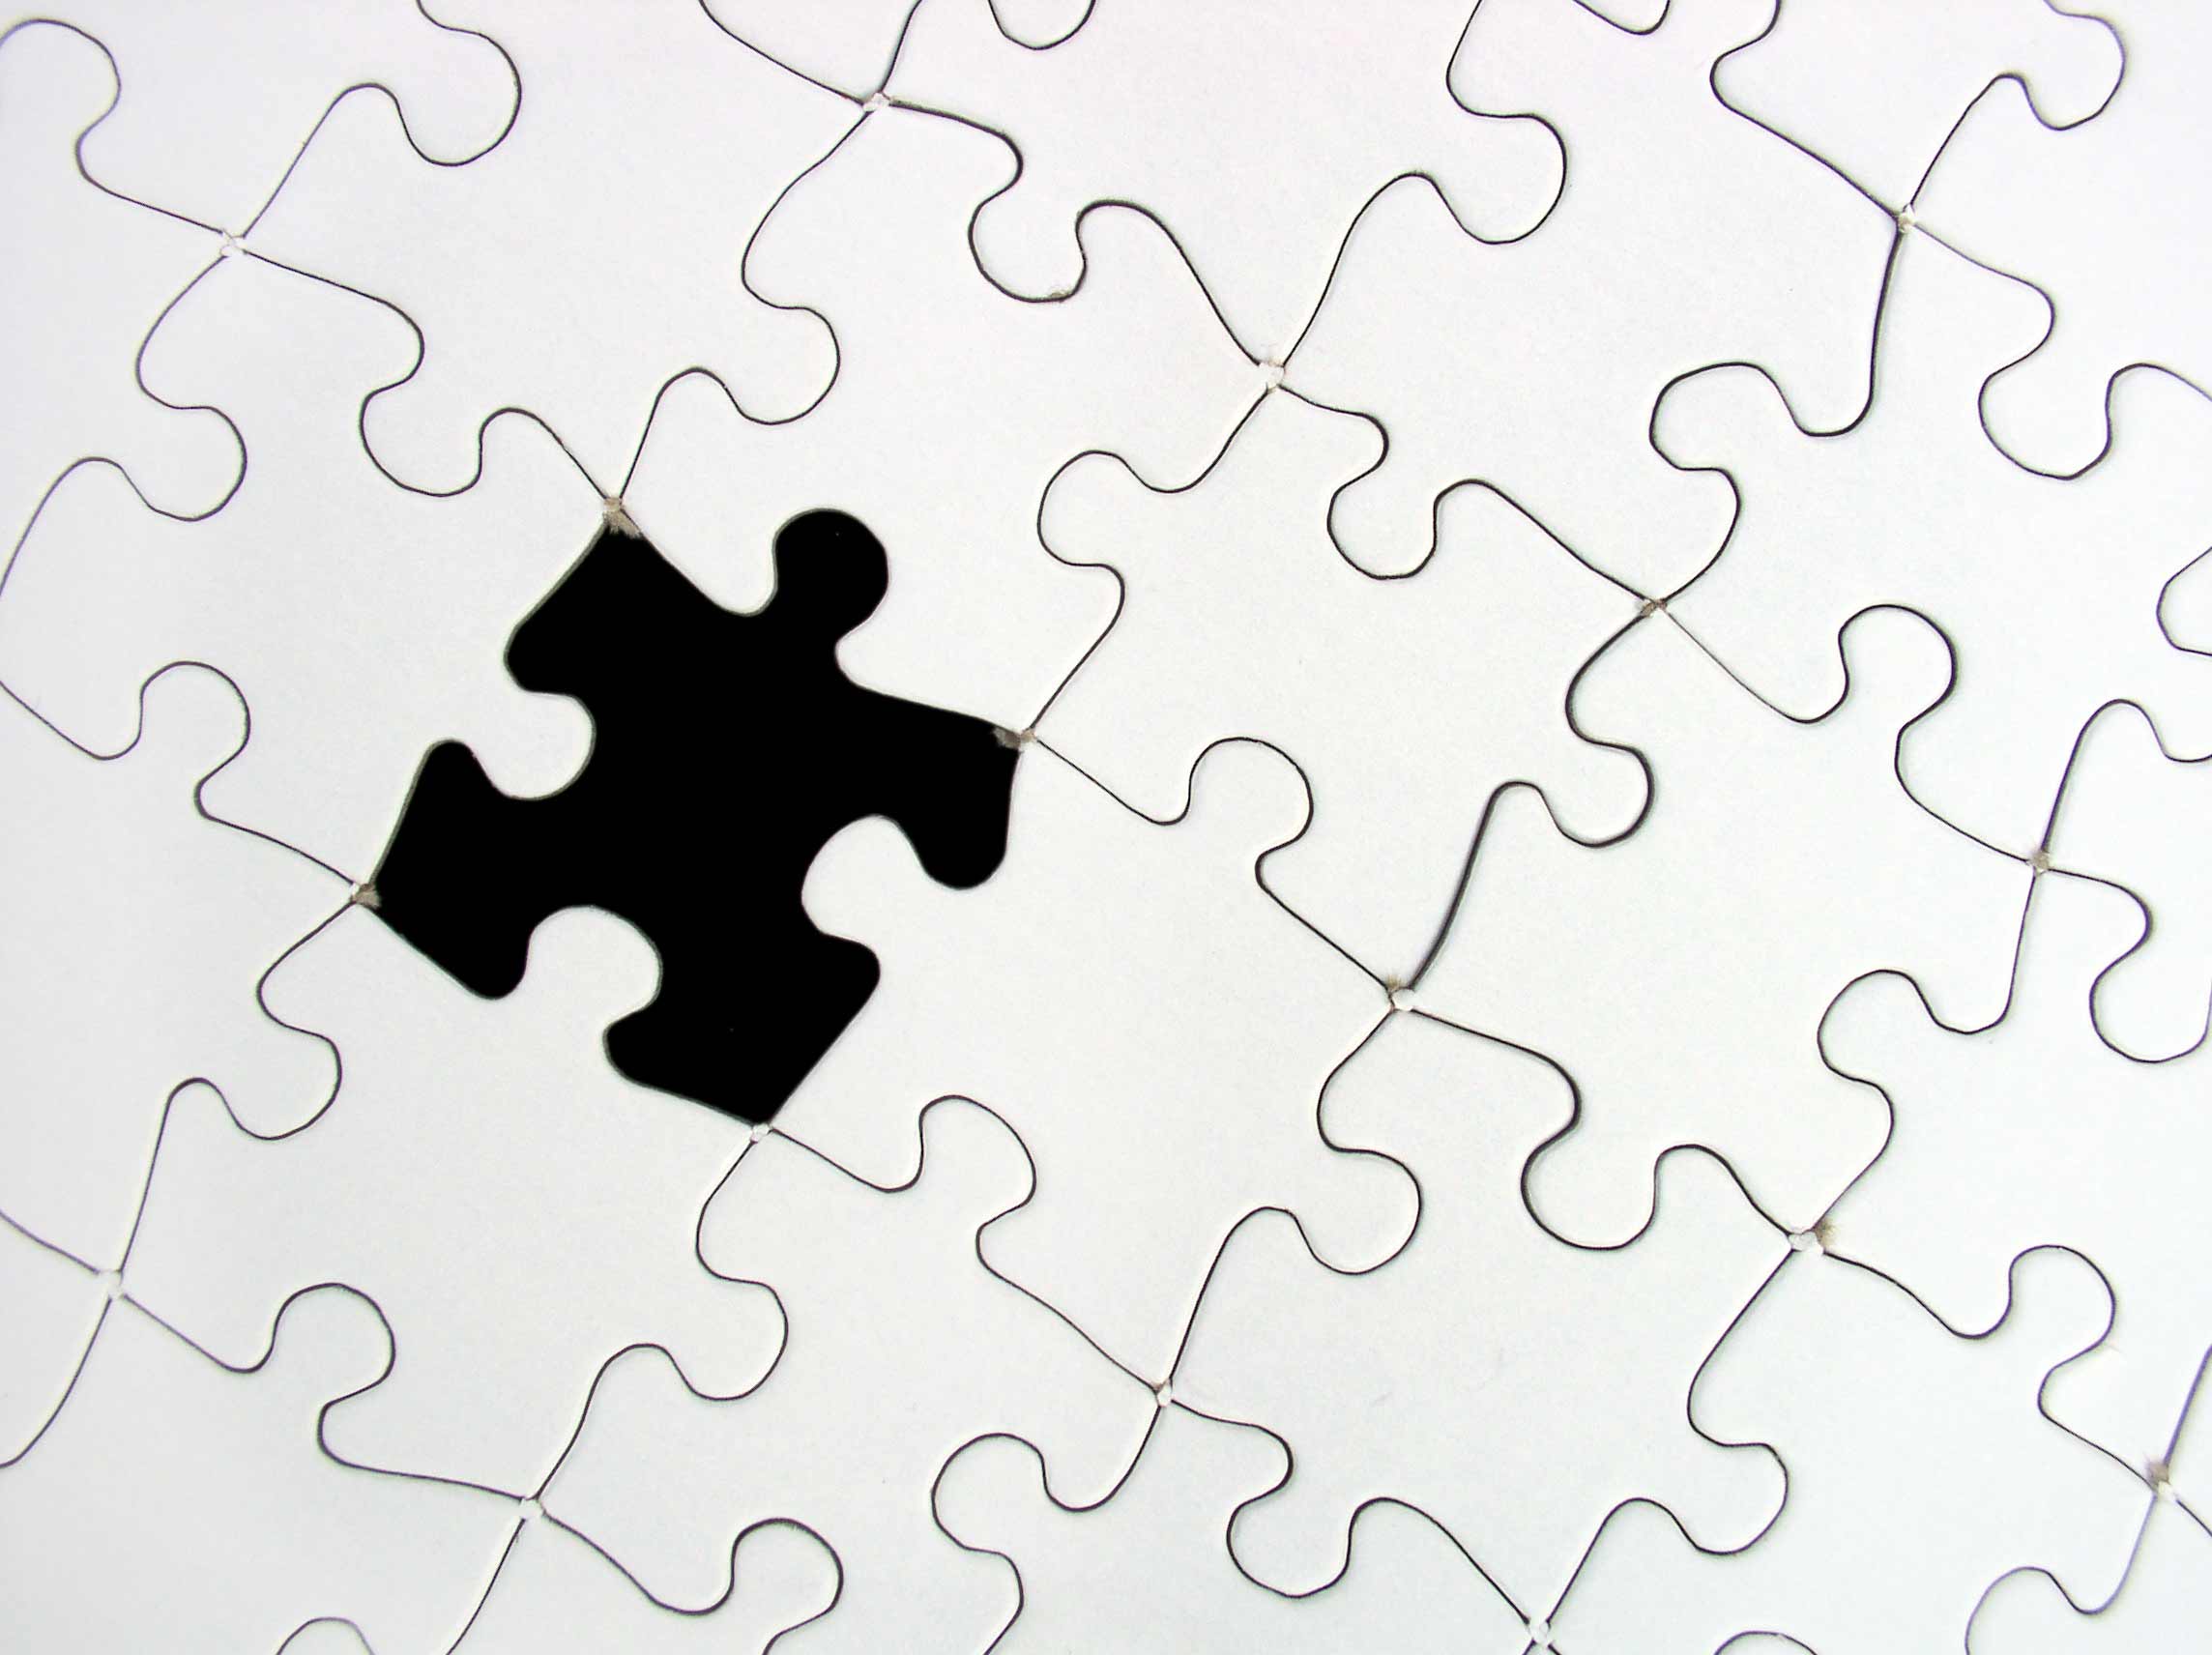 File:Puzzle black-white missing.jpg - Wikimedia Commons